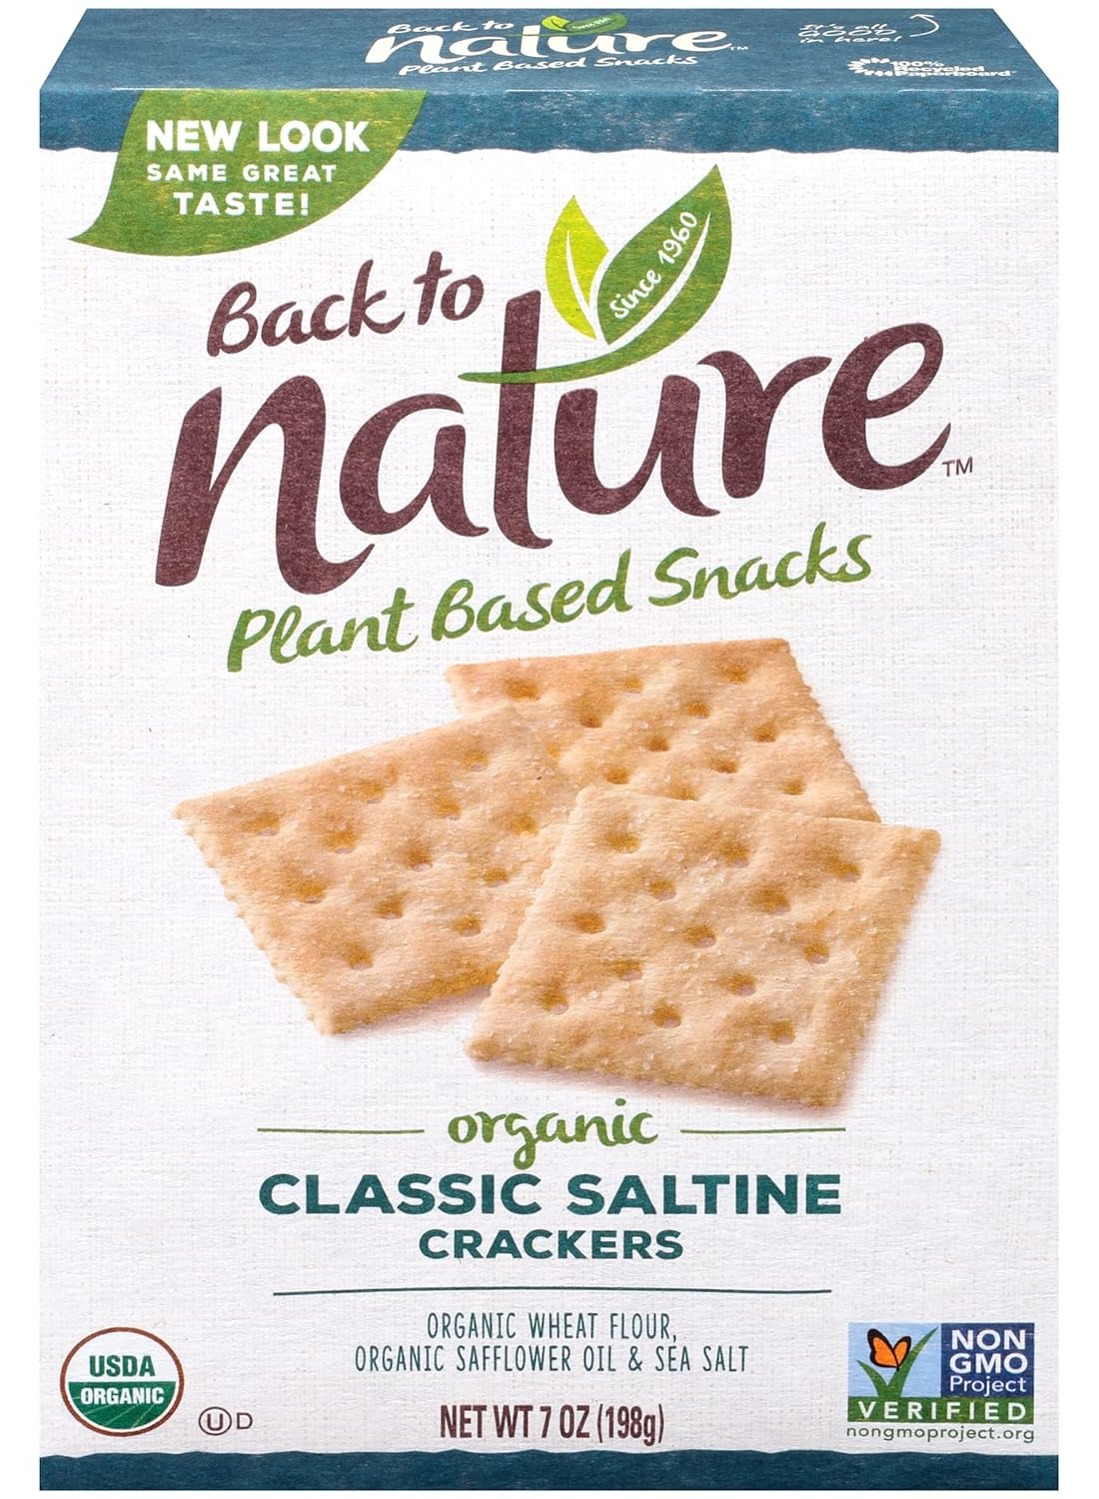 [S&S] $13.10: 6-Pack 7-Oz Back to Nature Organic Saltine Crackers at Amazon ($2.18 each)